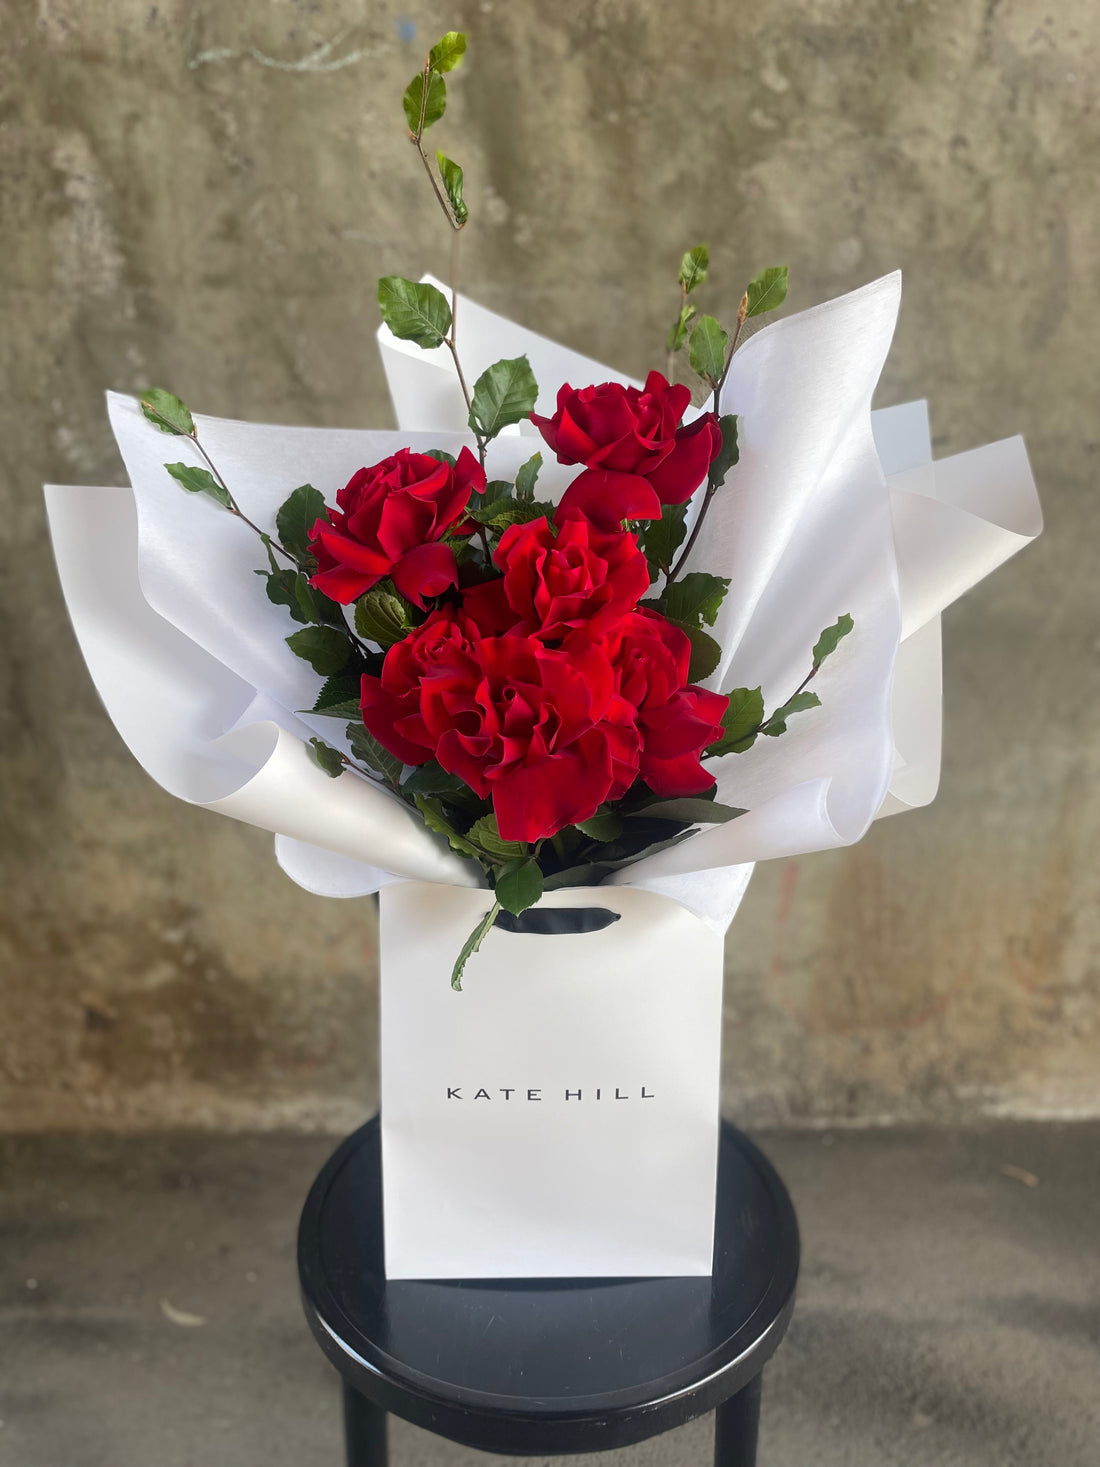 Close up image of the red rose bouquet. Simple red rose bouquet displaying 6 stems of red reflexed roses. Valentines day or Romance gift bouquet presented in our Kate Hill Flower Bag. Red rose bouquet bag sitting on a black bentwood chair with white background.